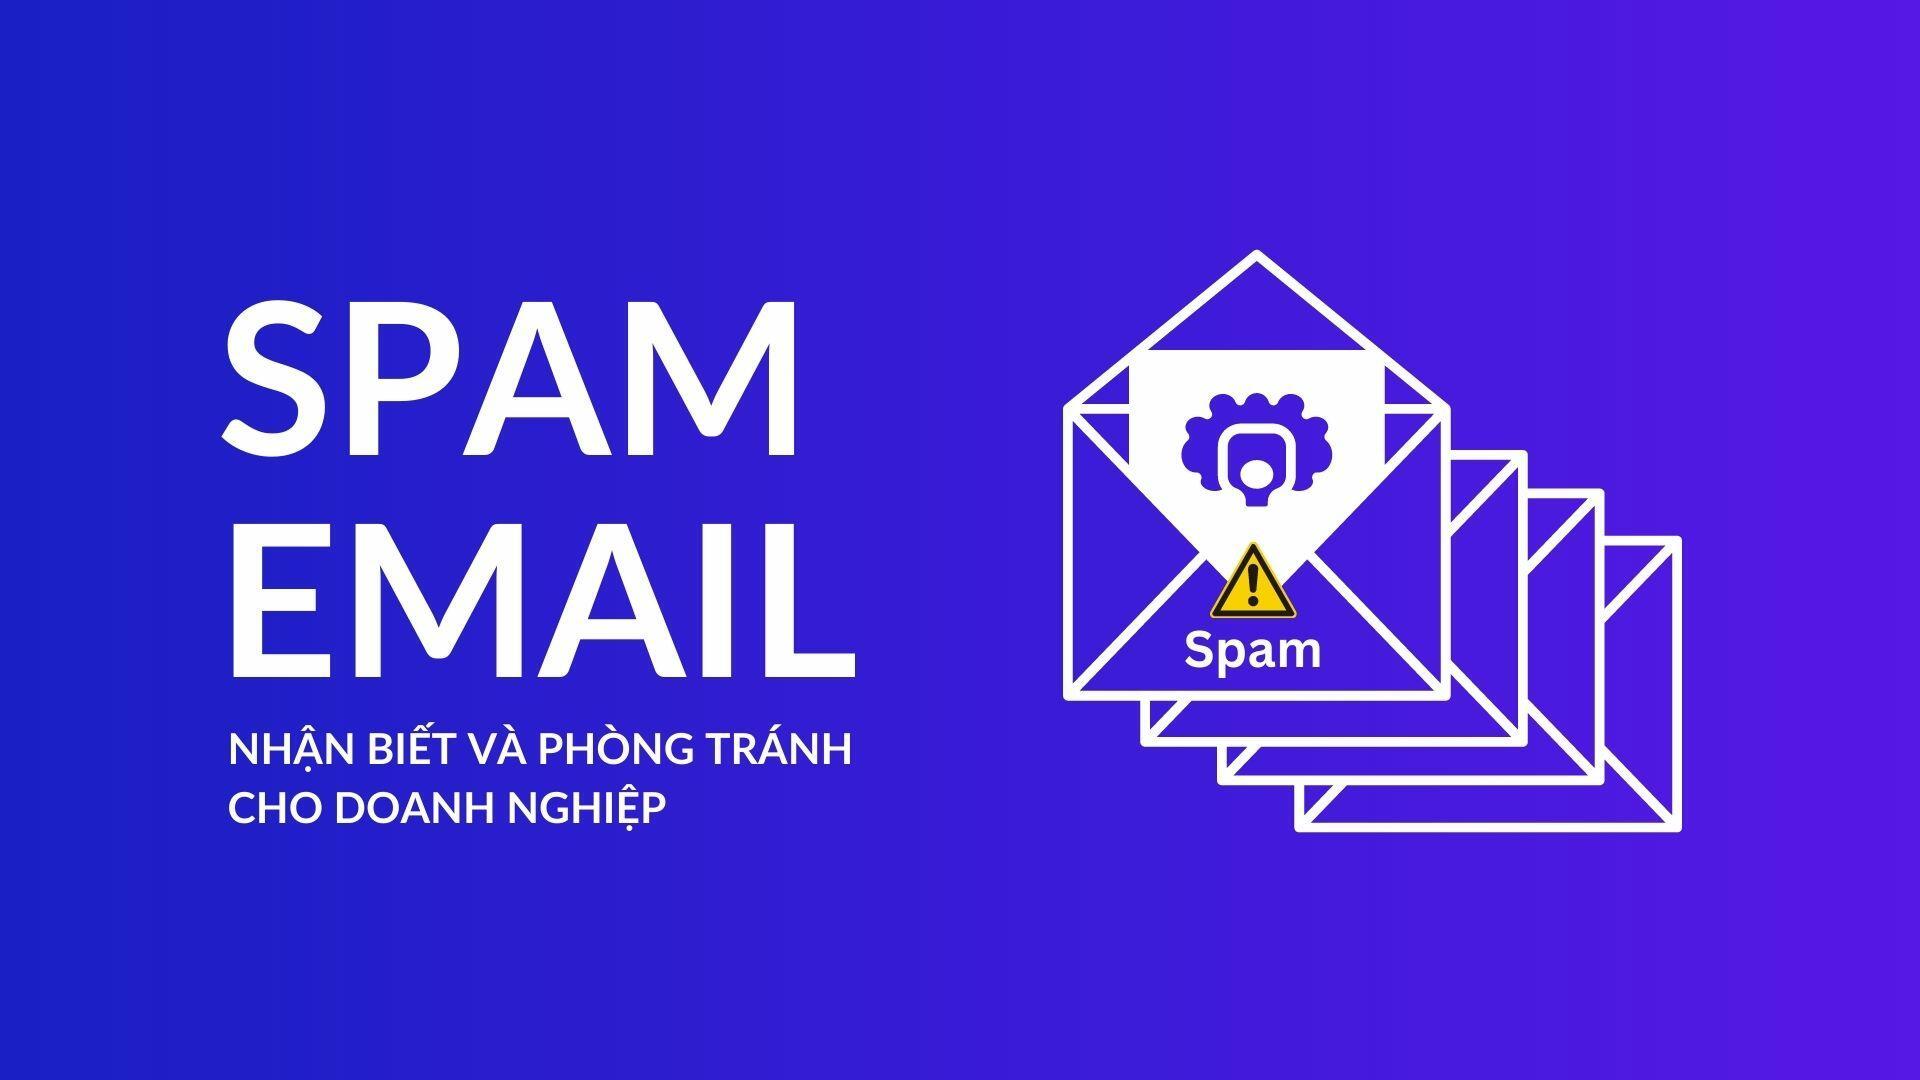 What spam emails are and how to avoid them